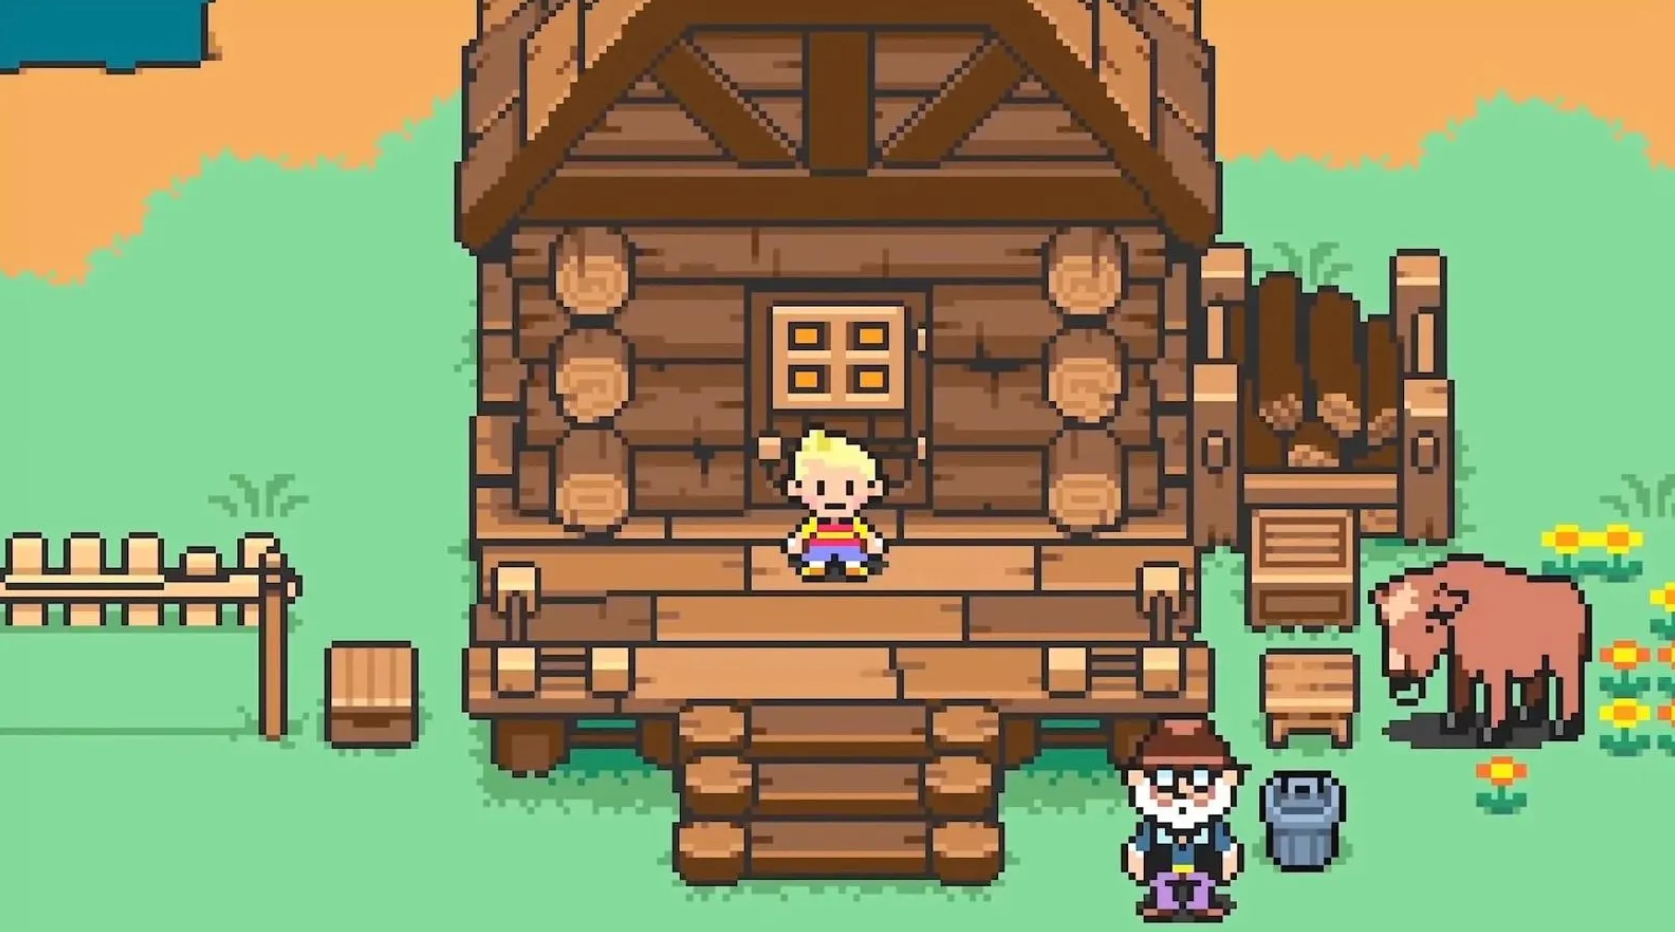 gameplay of mother 3